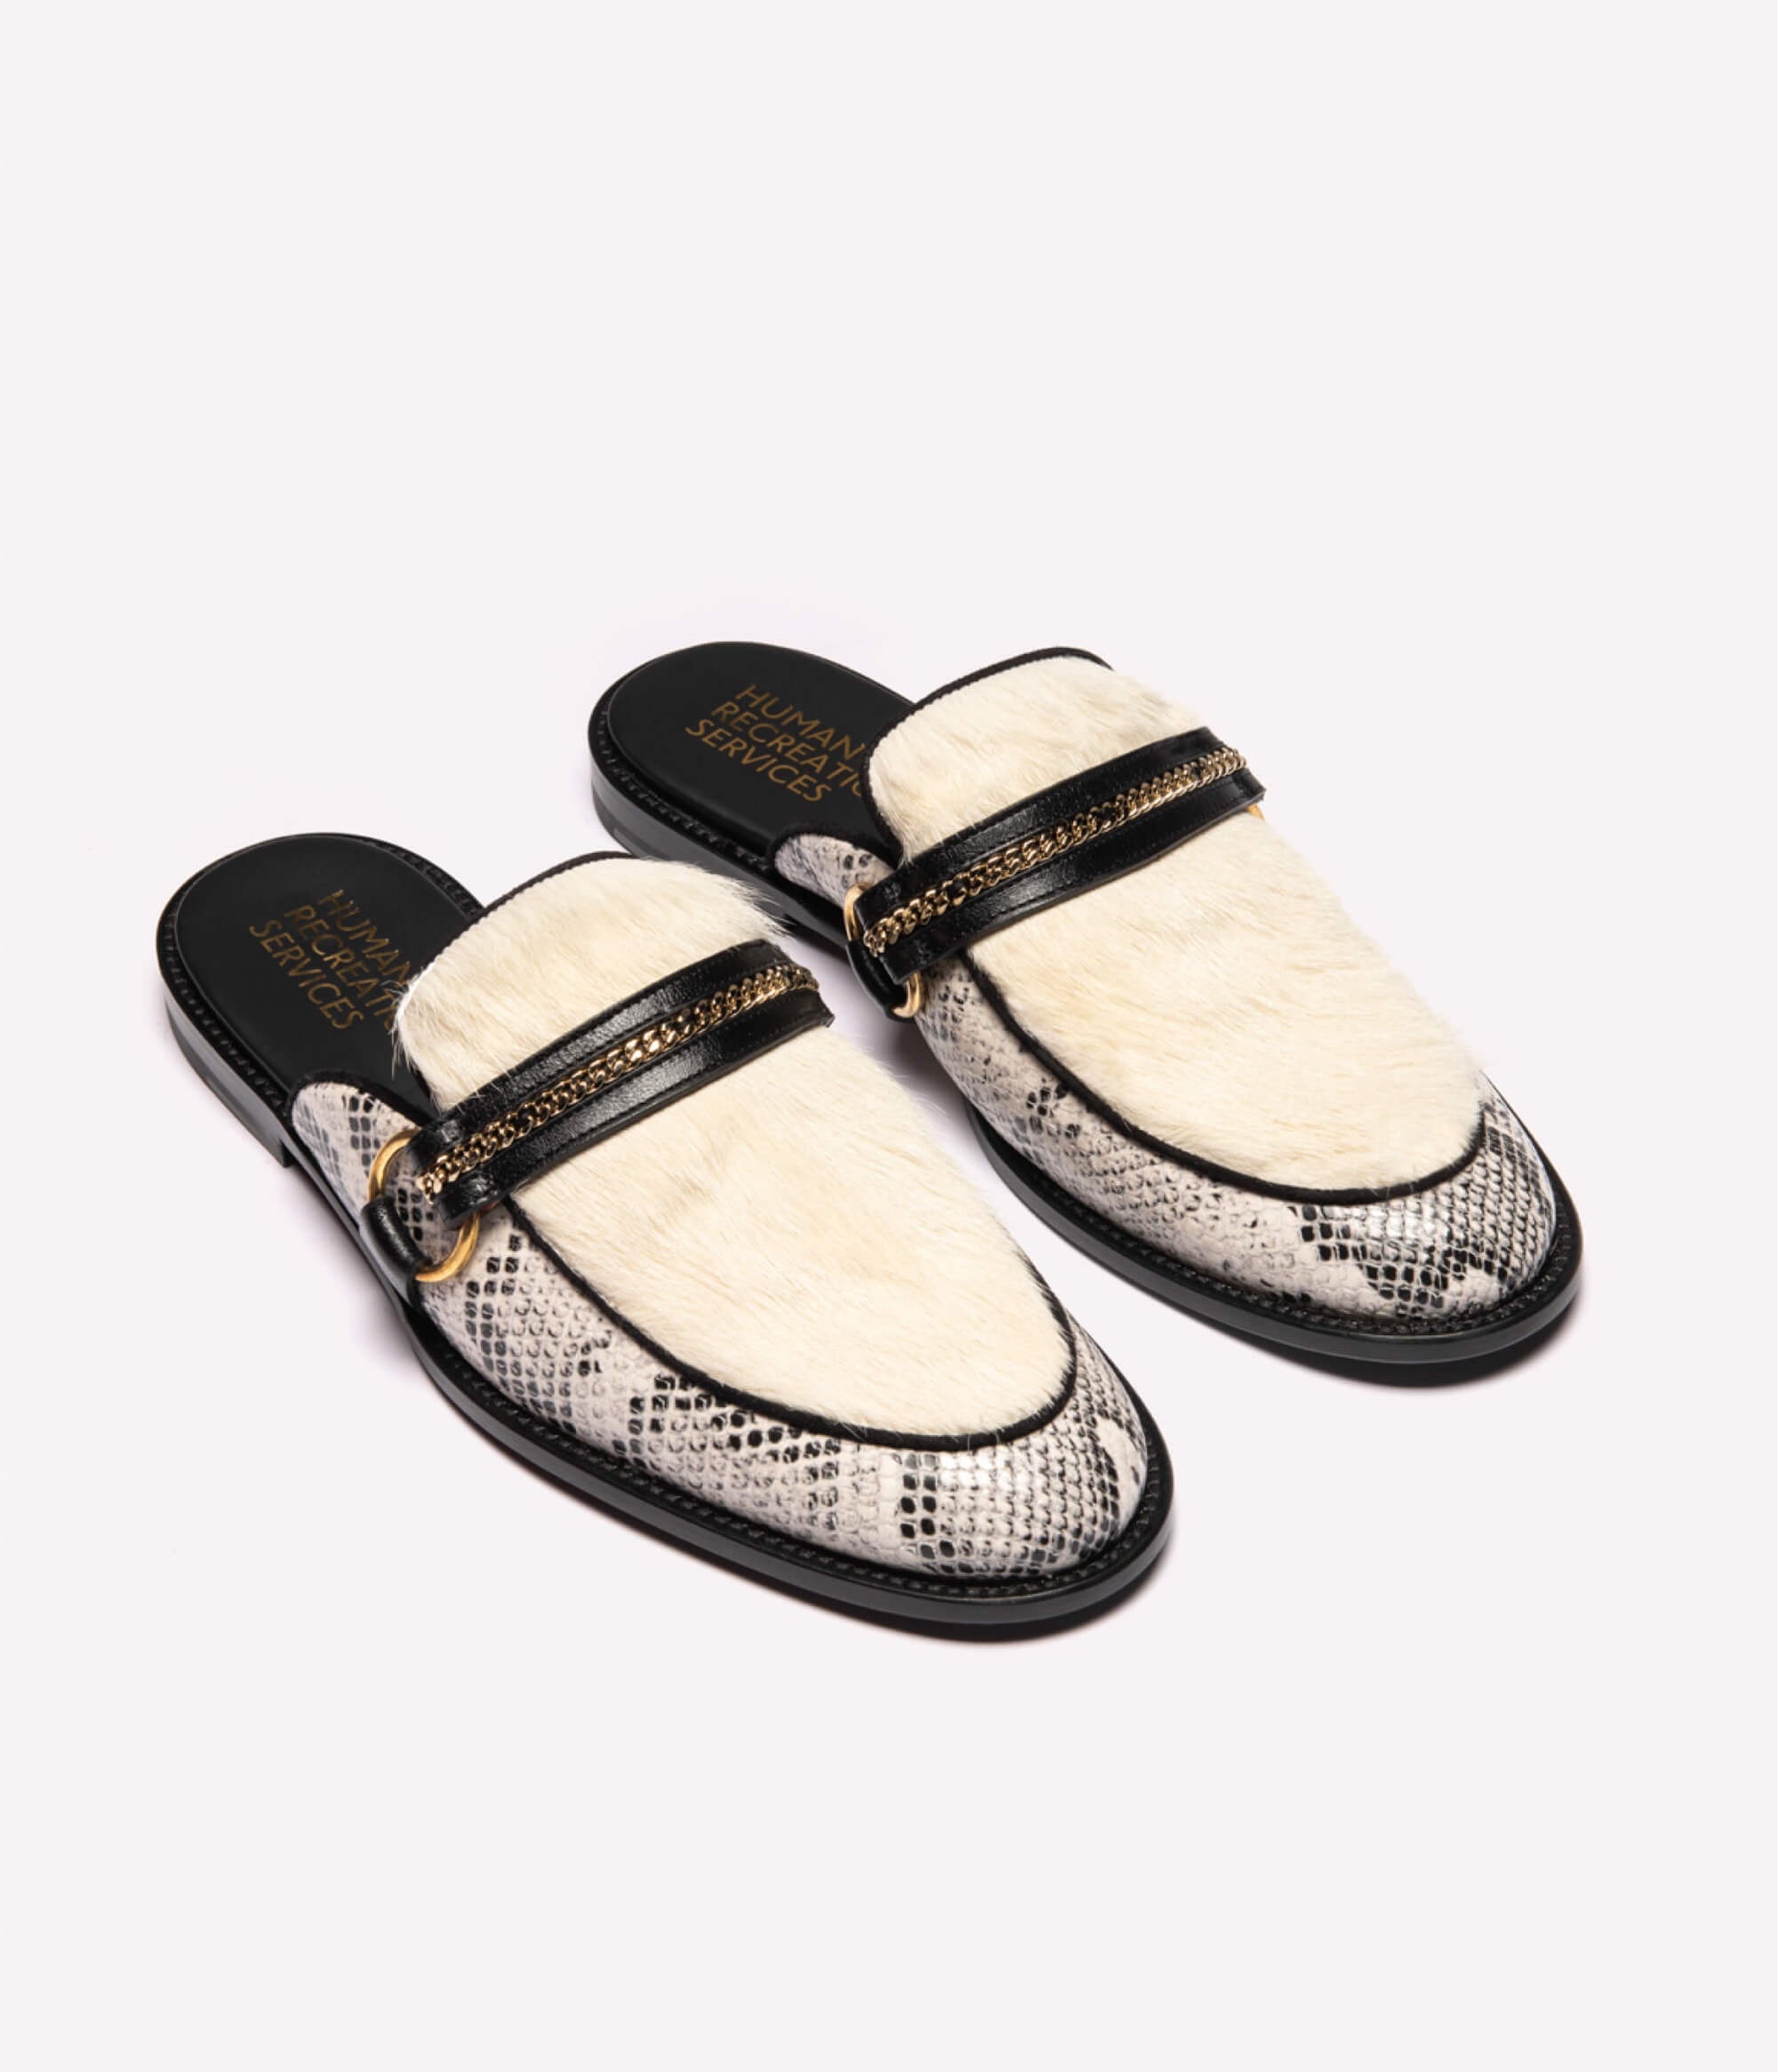 HUMAN RECREATIONAL SERVICES PALAZZO SLIPPER IN WHITE SNAKE MADE WITH ITALIAN CALF SKIN